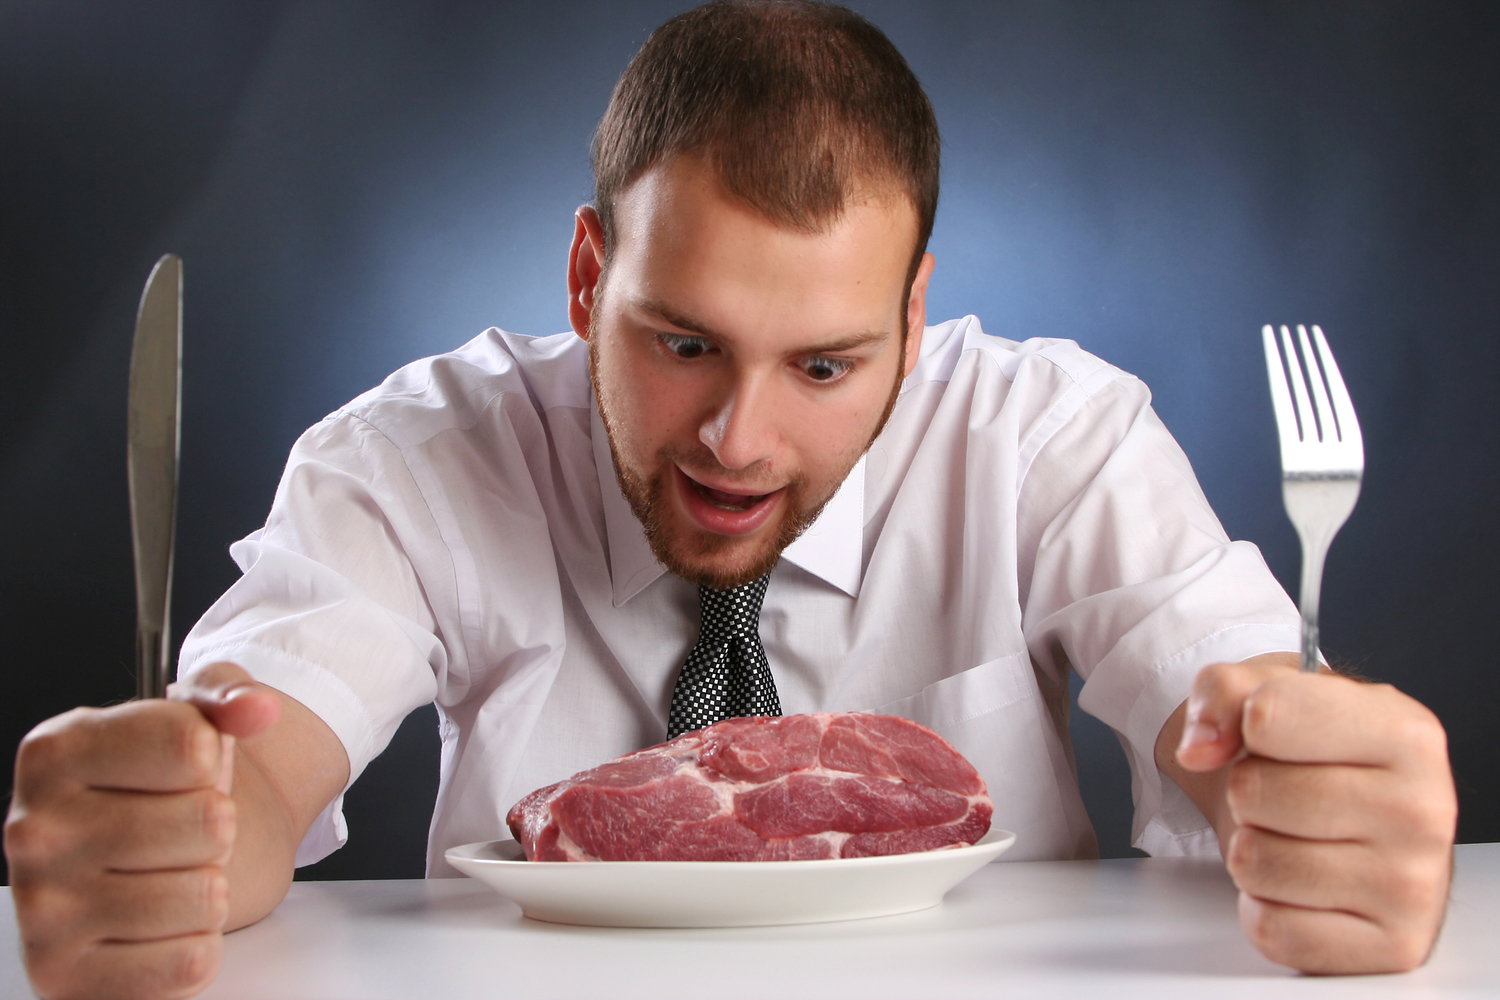 People think beef is manly, and that's a big problem